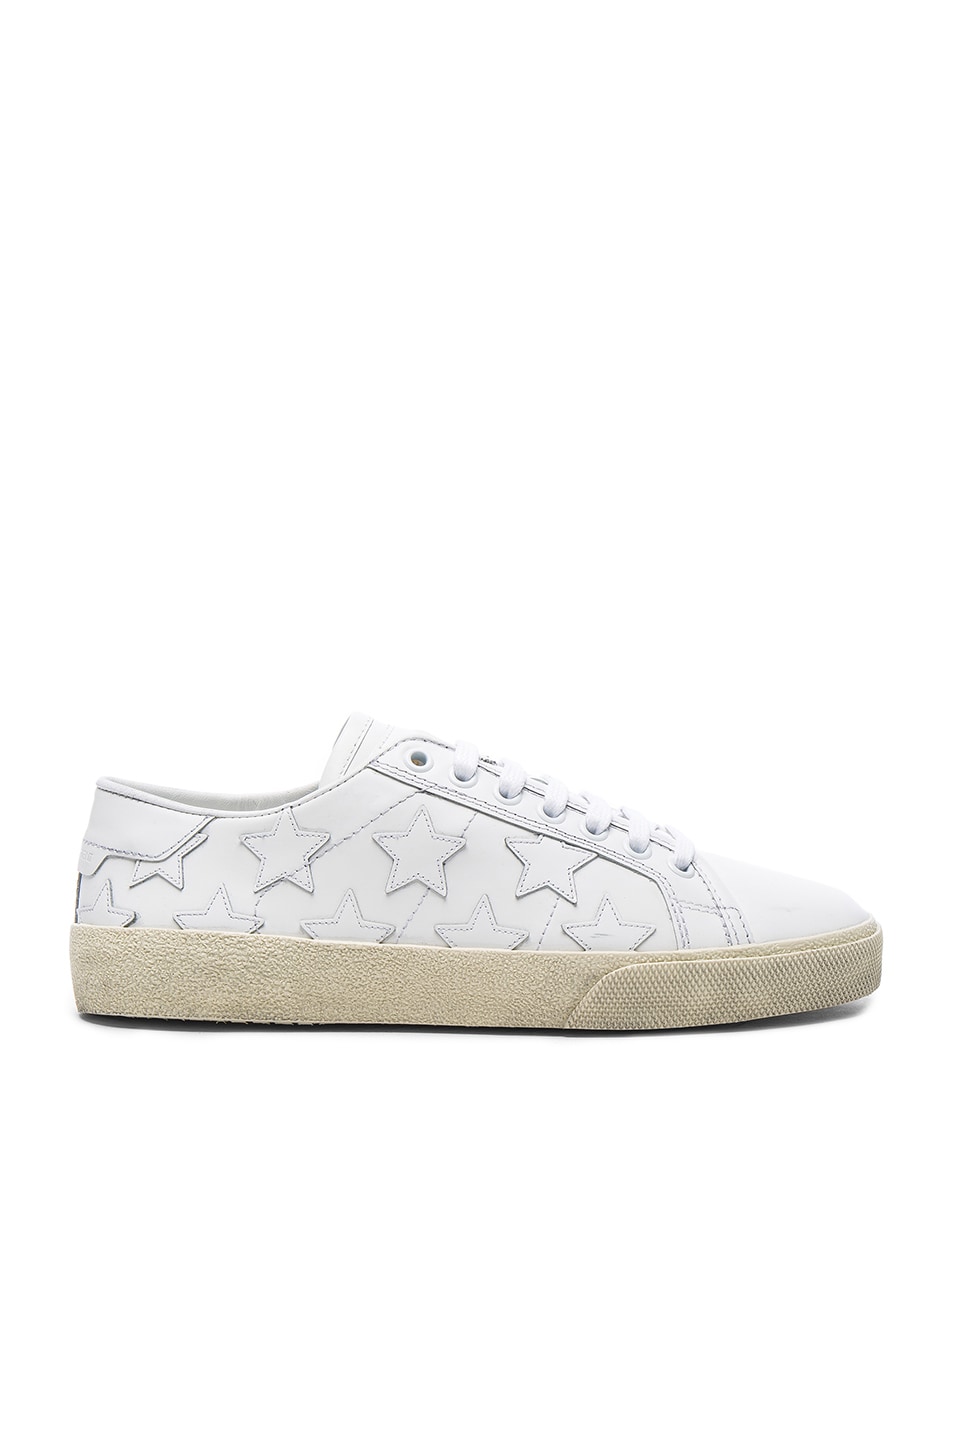 Image 1 of Saint Laurent Leather Court Classic Star Sneakers in Off White